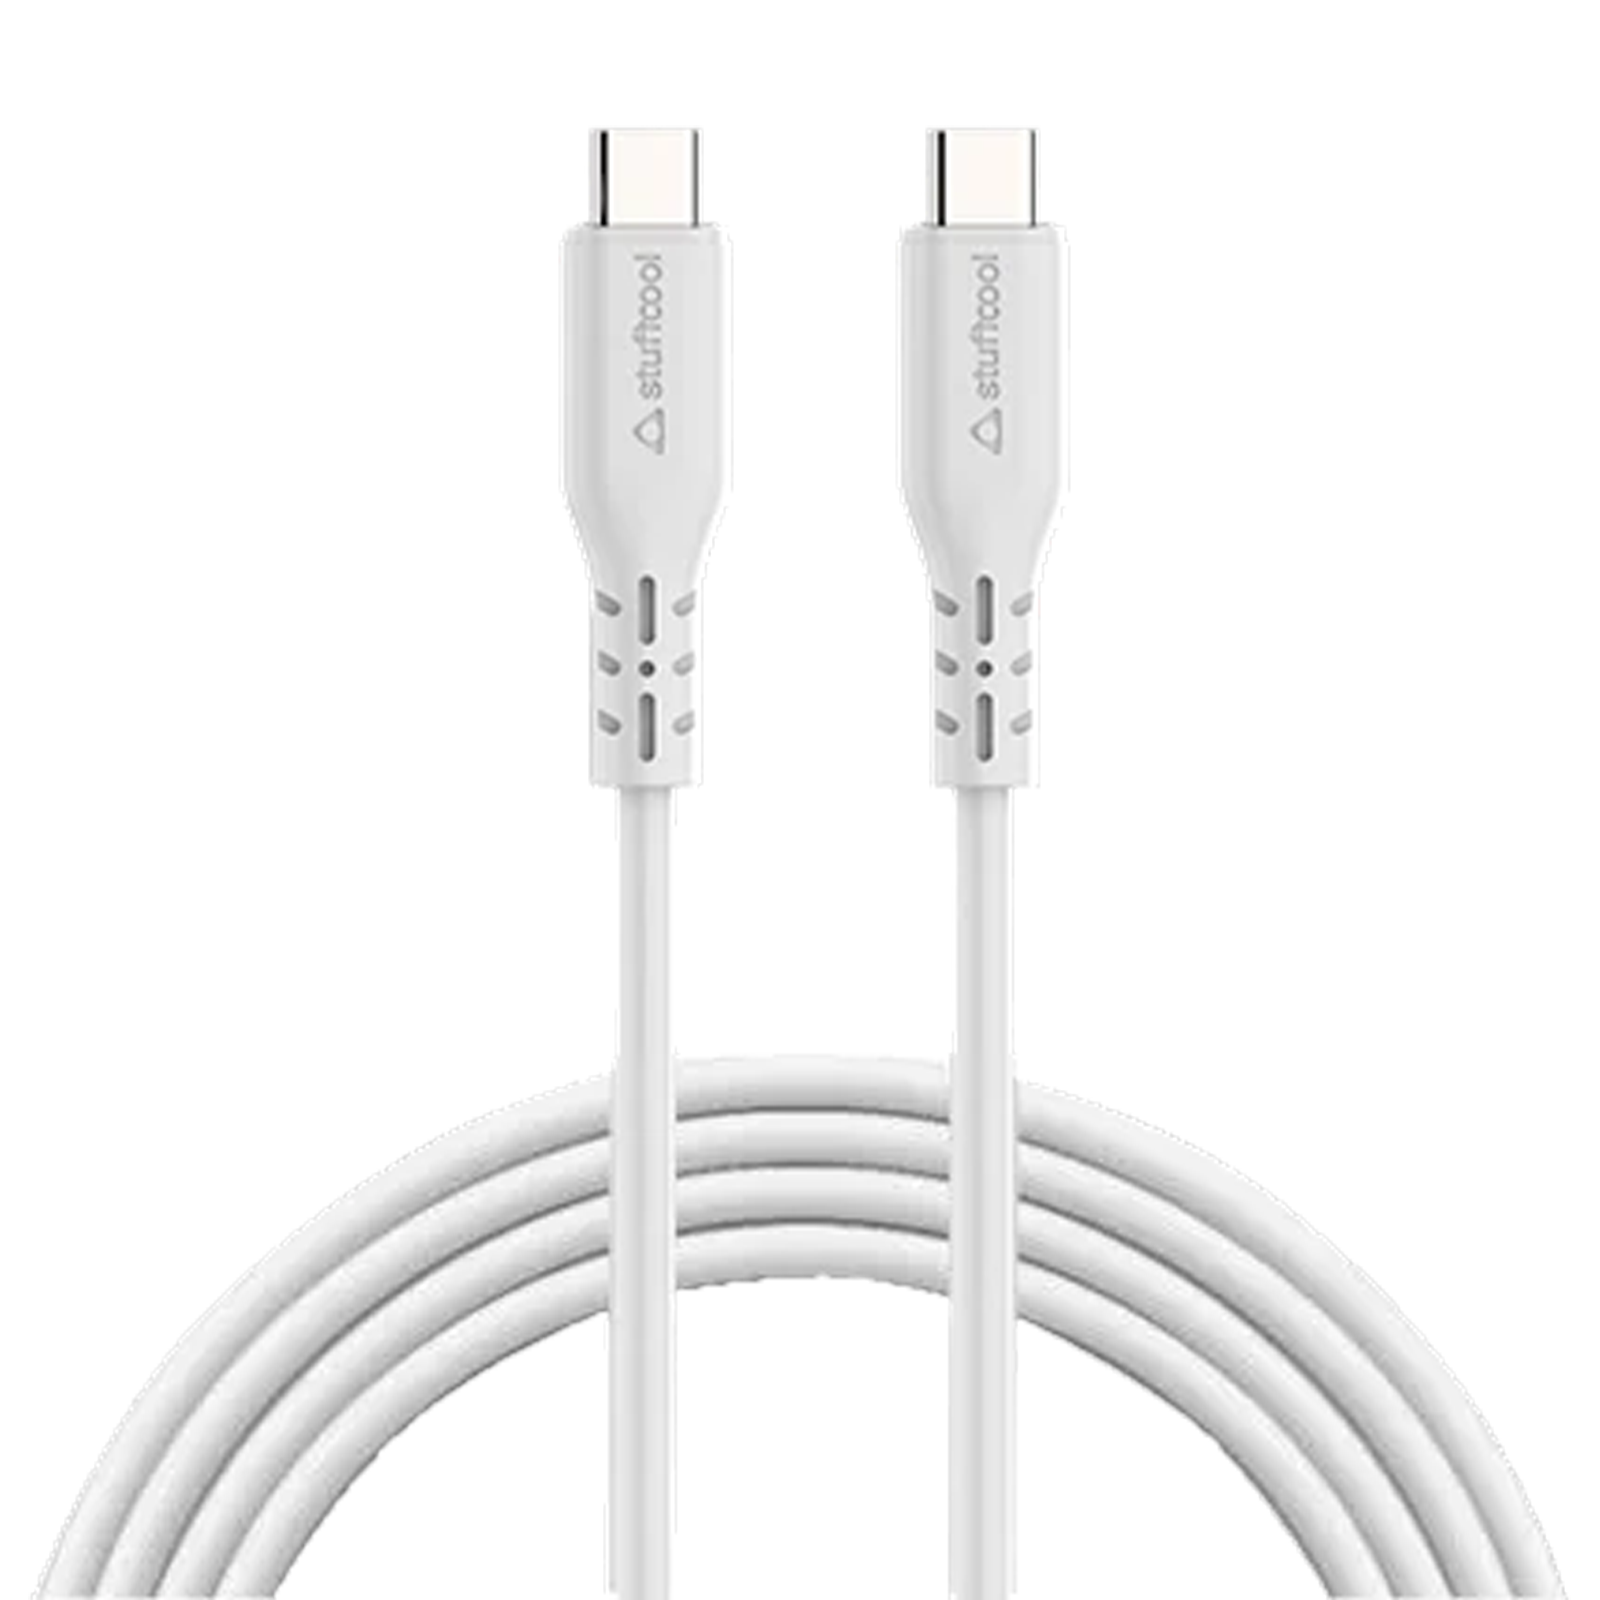 stuffcool Celer Type C to C 4.9 Feet (1.5M) Cable (Sync and Charge Support, White)